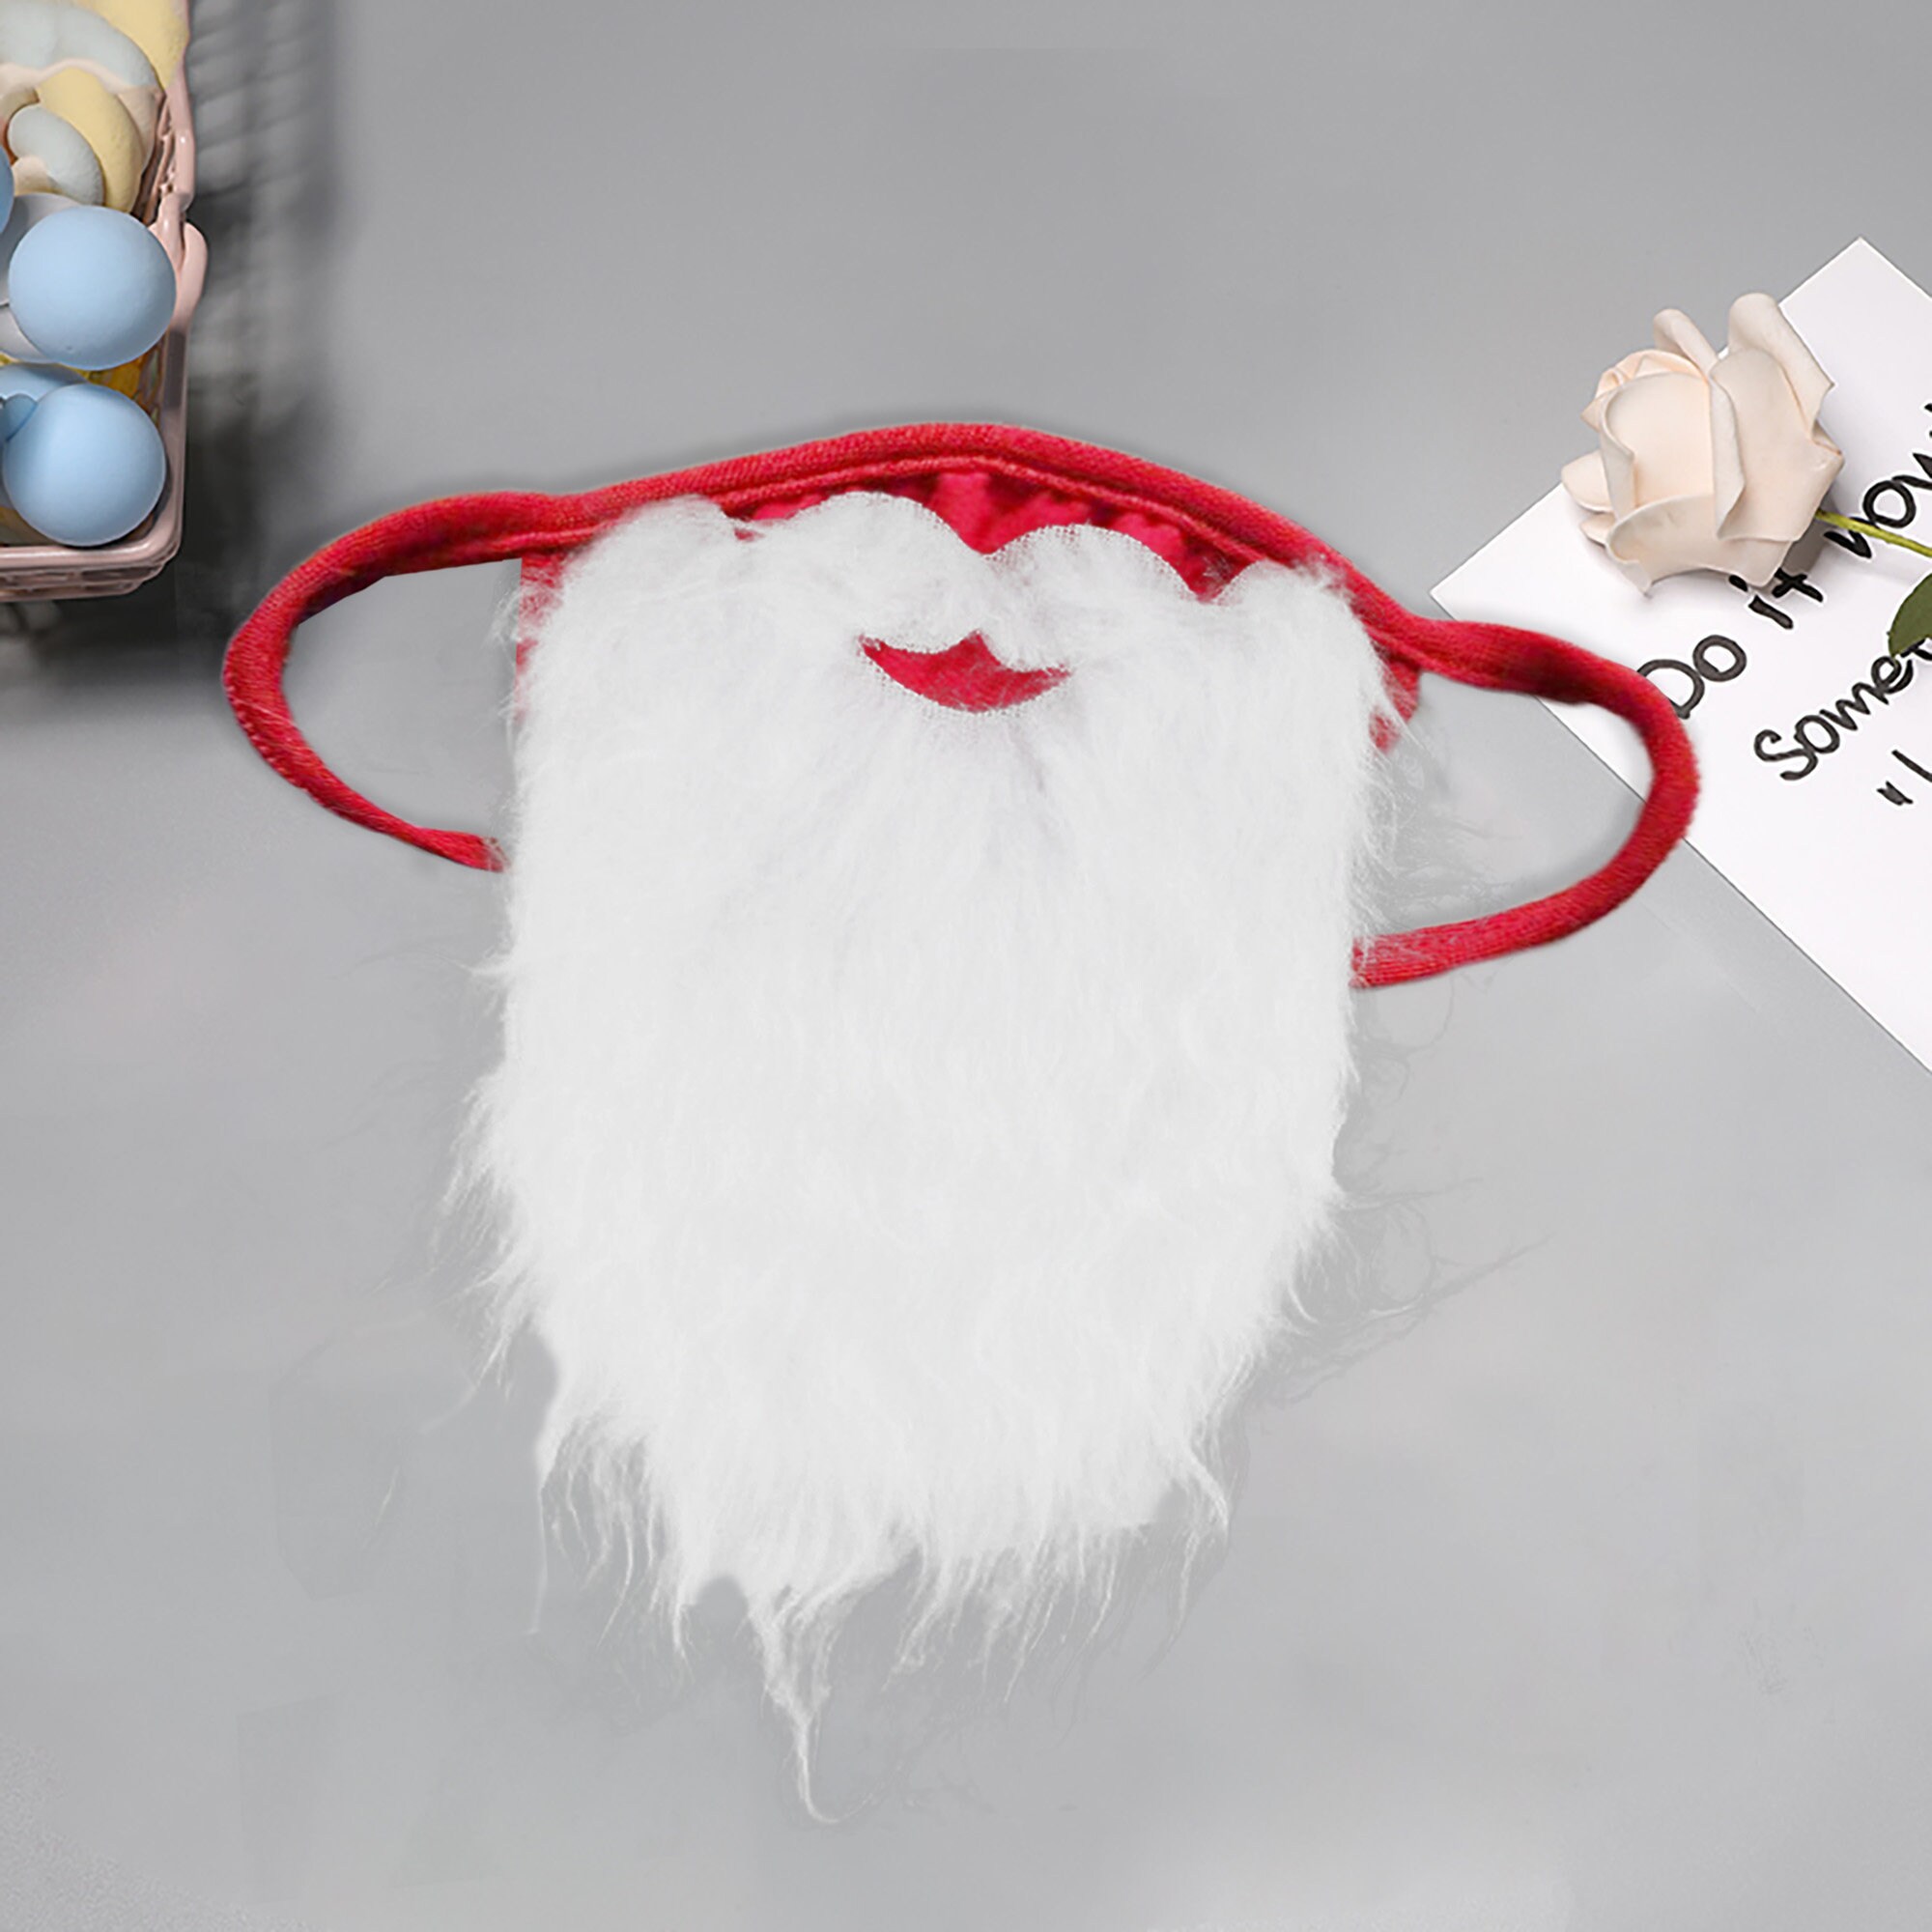 Can Be Used As Fancy Mask santa beard with mustage white long beard Christmas 